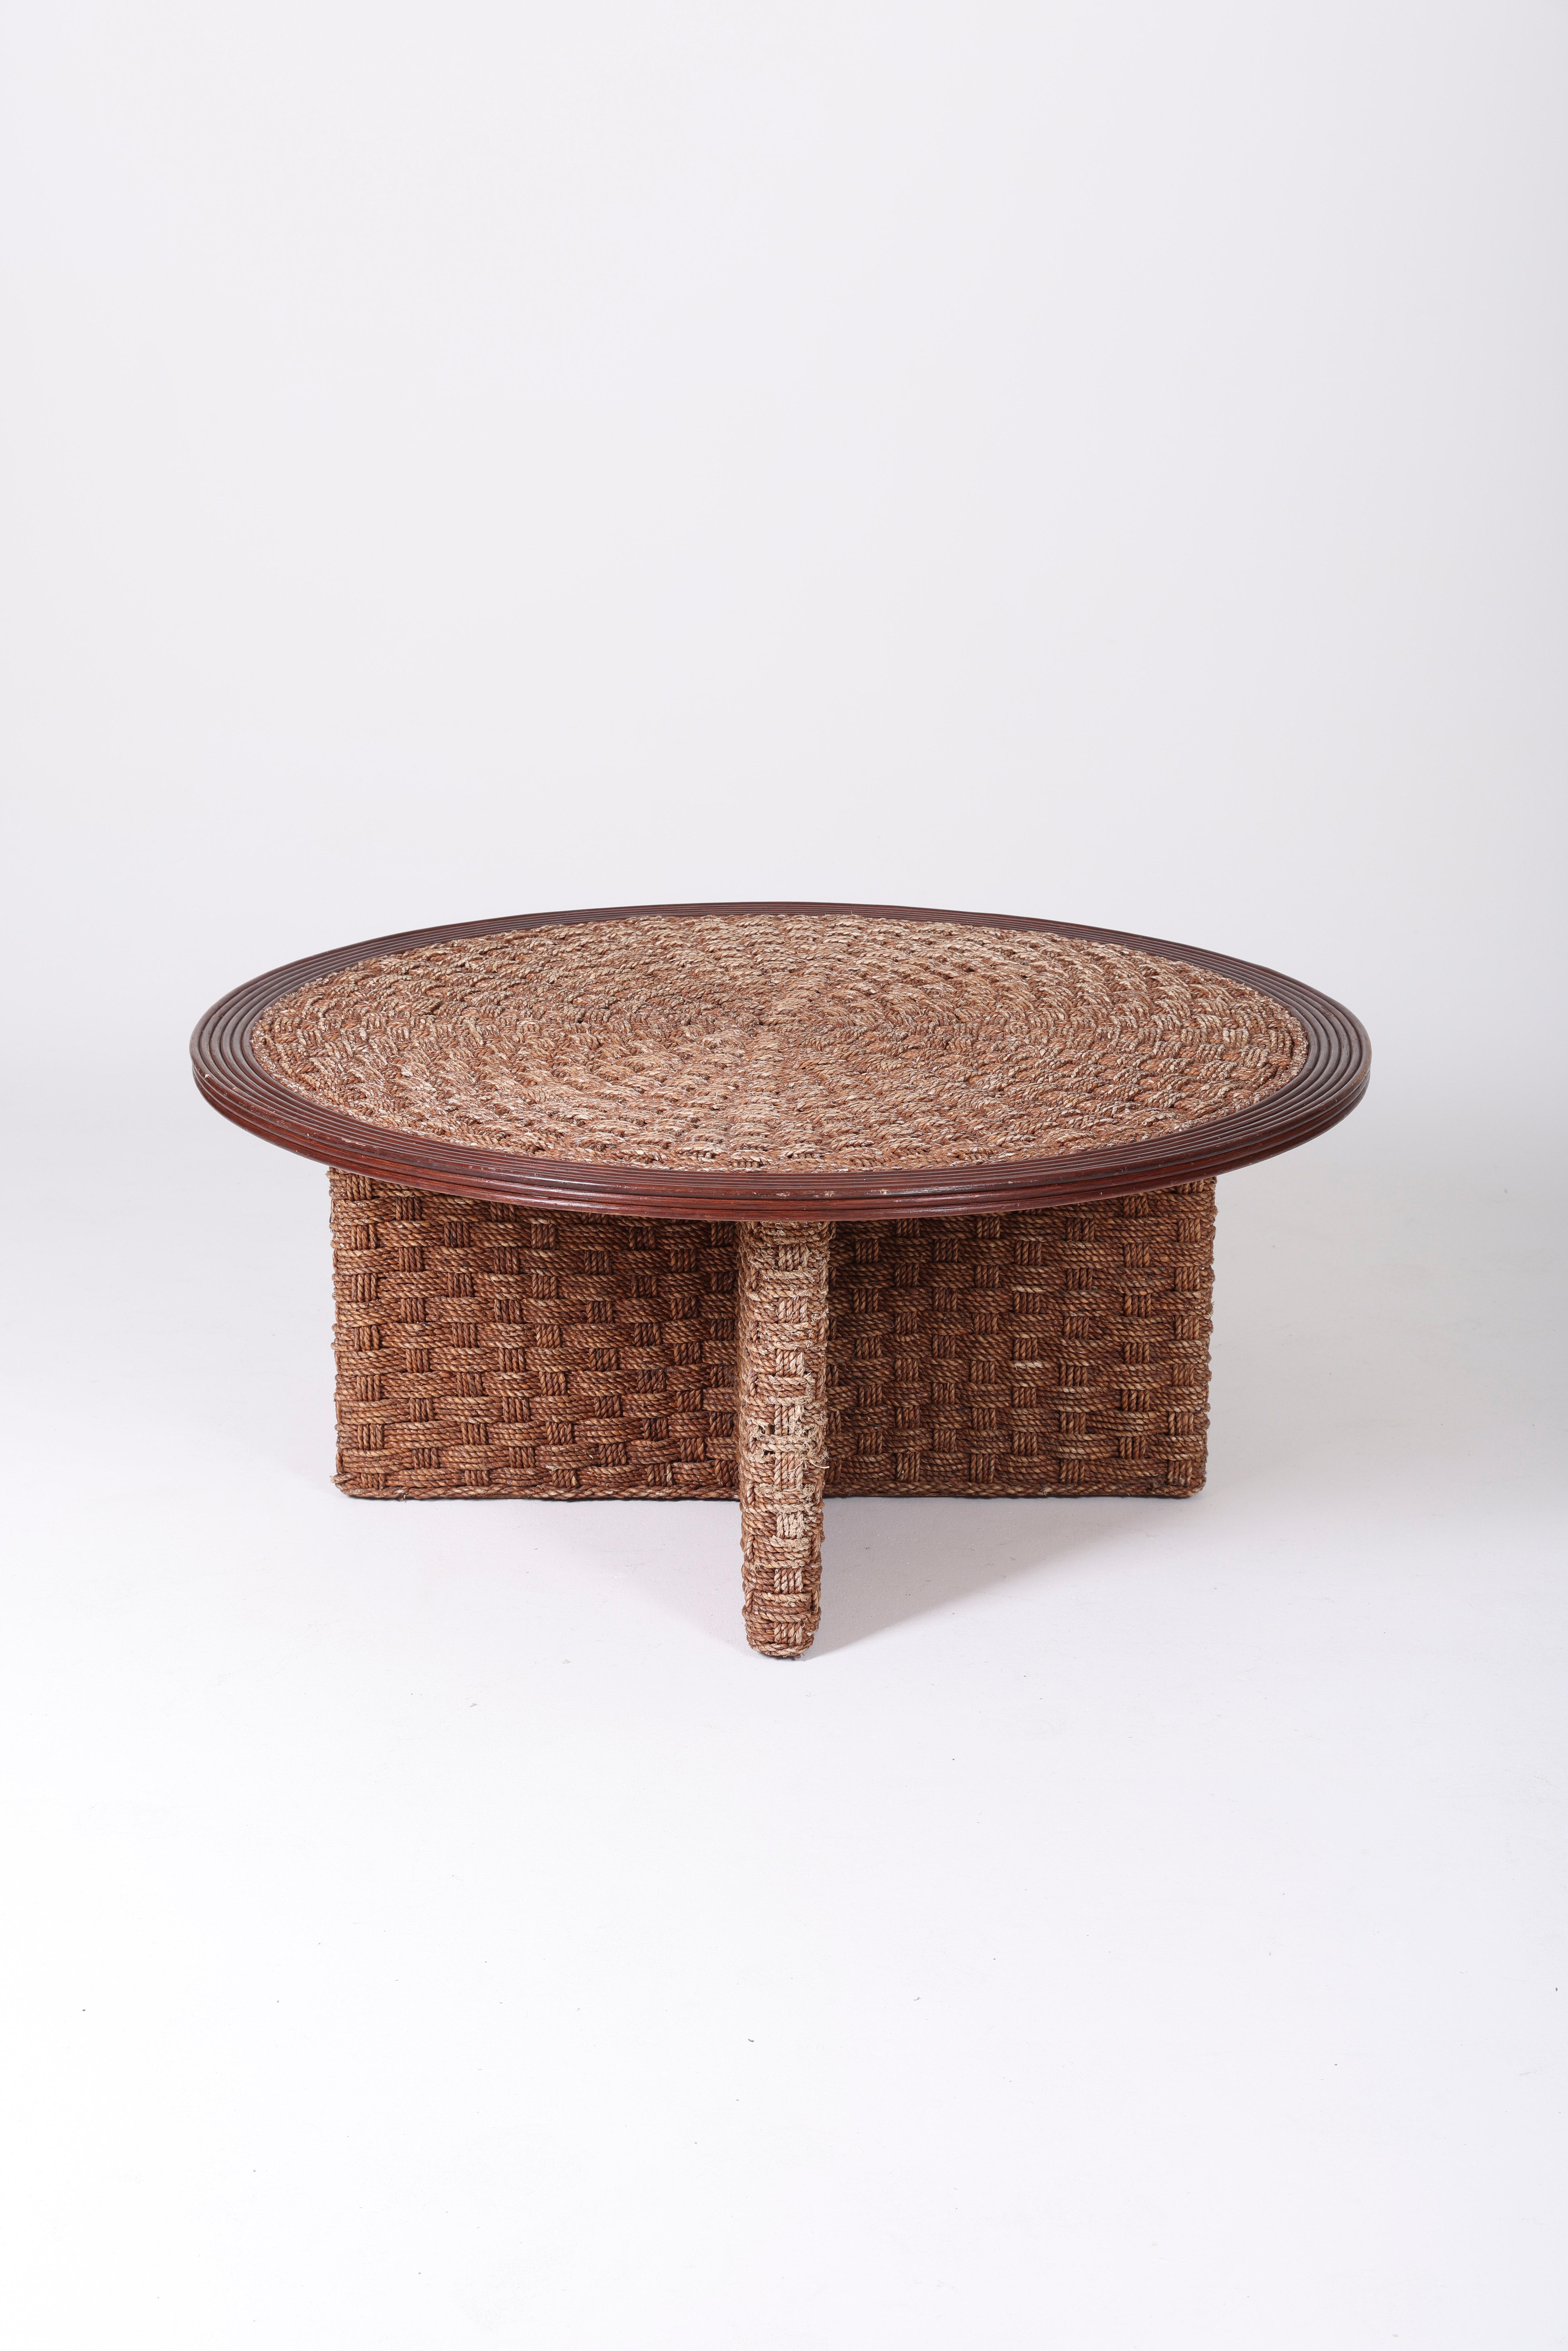 20th Century Coffee table and stools in woven rope and wood, mid-20th century For Sale